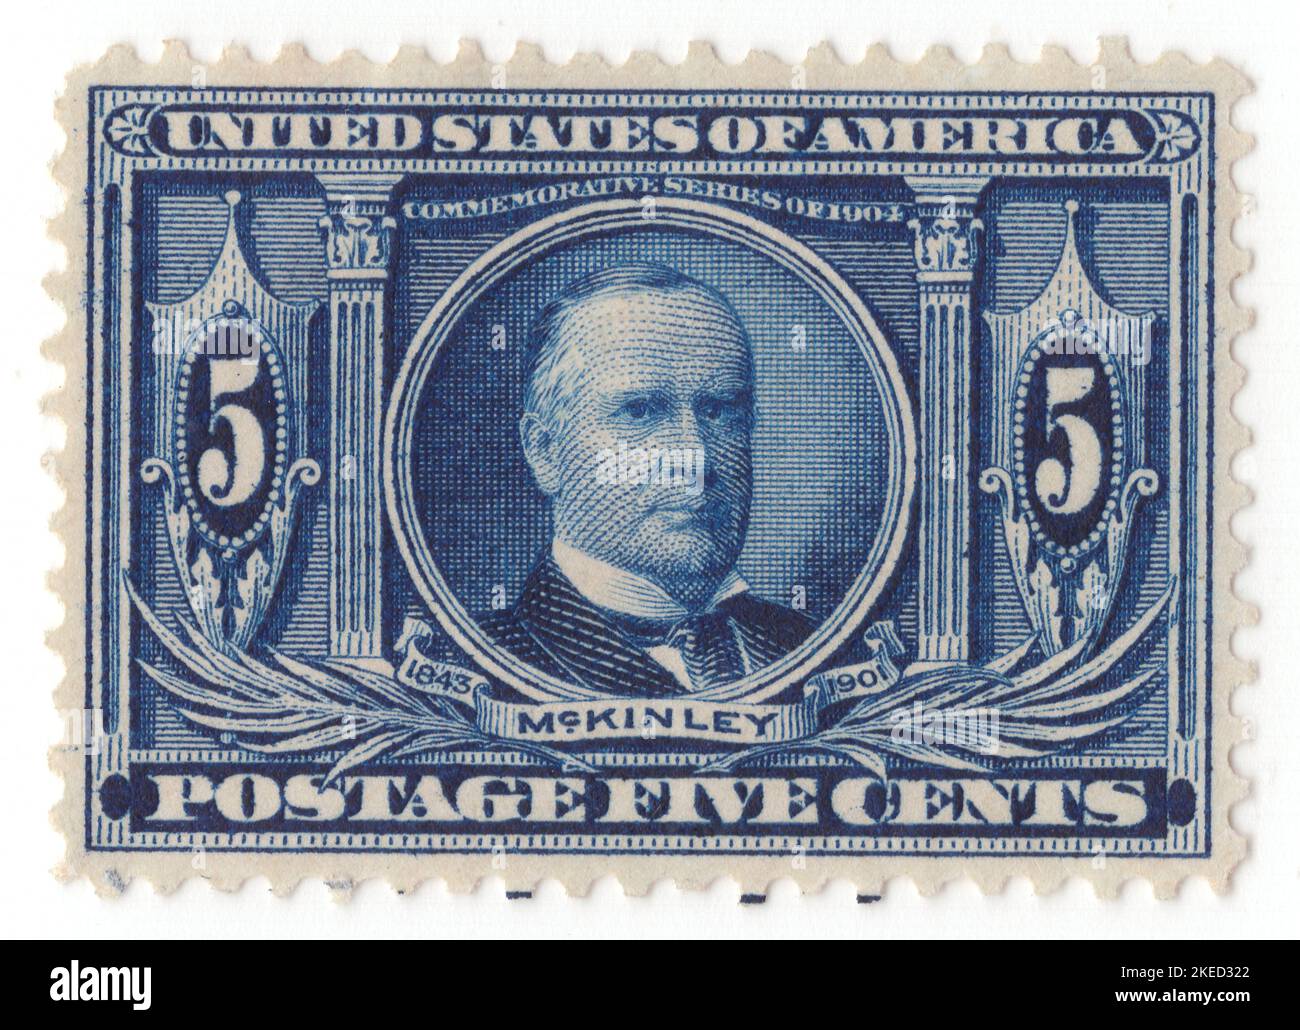 USA - 1904: An 5 cents dark blue postage stamp depicting portrait of William McKinley, Louisiana Purchase Exposition. 25th president of the United States, serving from 1897 until his assassination in 1901. As a politician he led a realignment that made his Republican Party largely dominant in the industrial states and nationwide until the 1930s. He presided over victory in the Spanish–American War of 1898; gained control of Hawaii, Puerto Rico, the Philippines and Cuba; restored prosperity after a deep depression; rejected the inflationary monetary policy of free silver Stock Photo